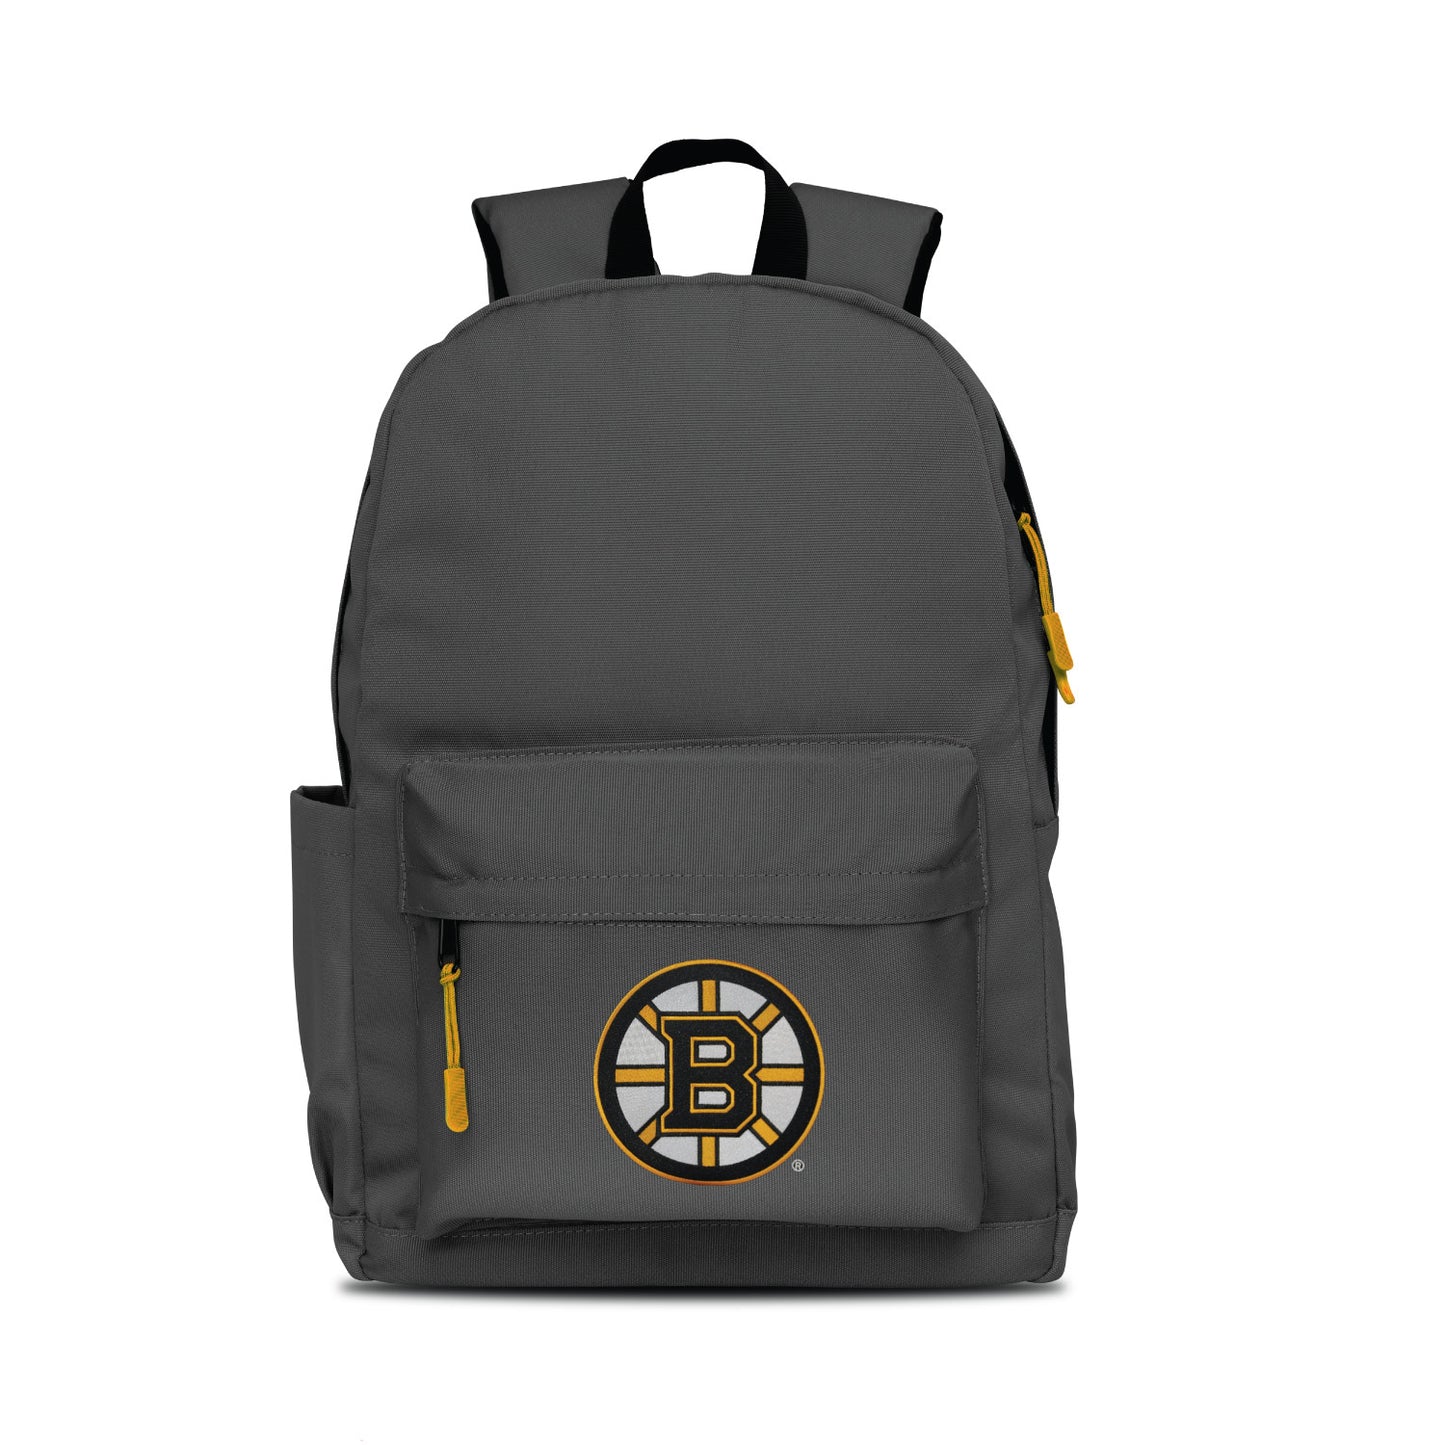 Boston Bruins Campus Laptop Backpack- Gray